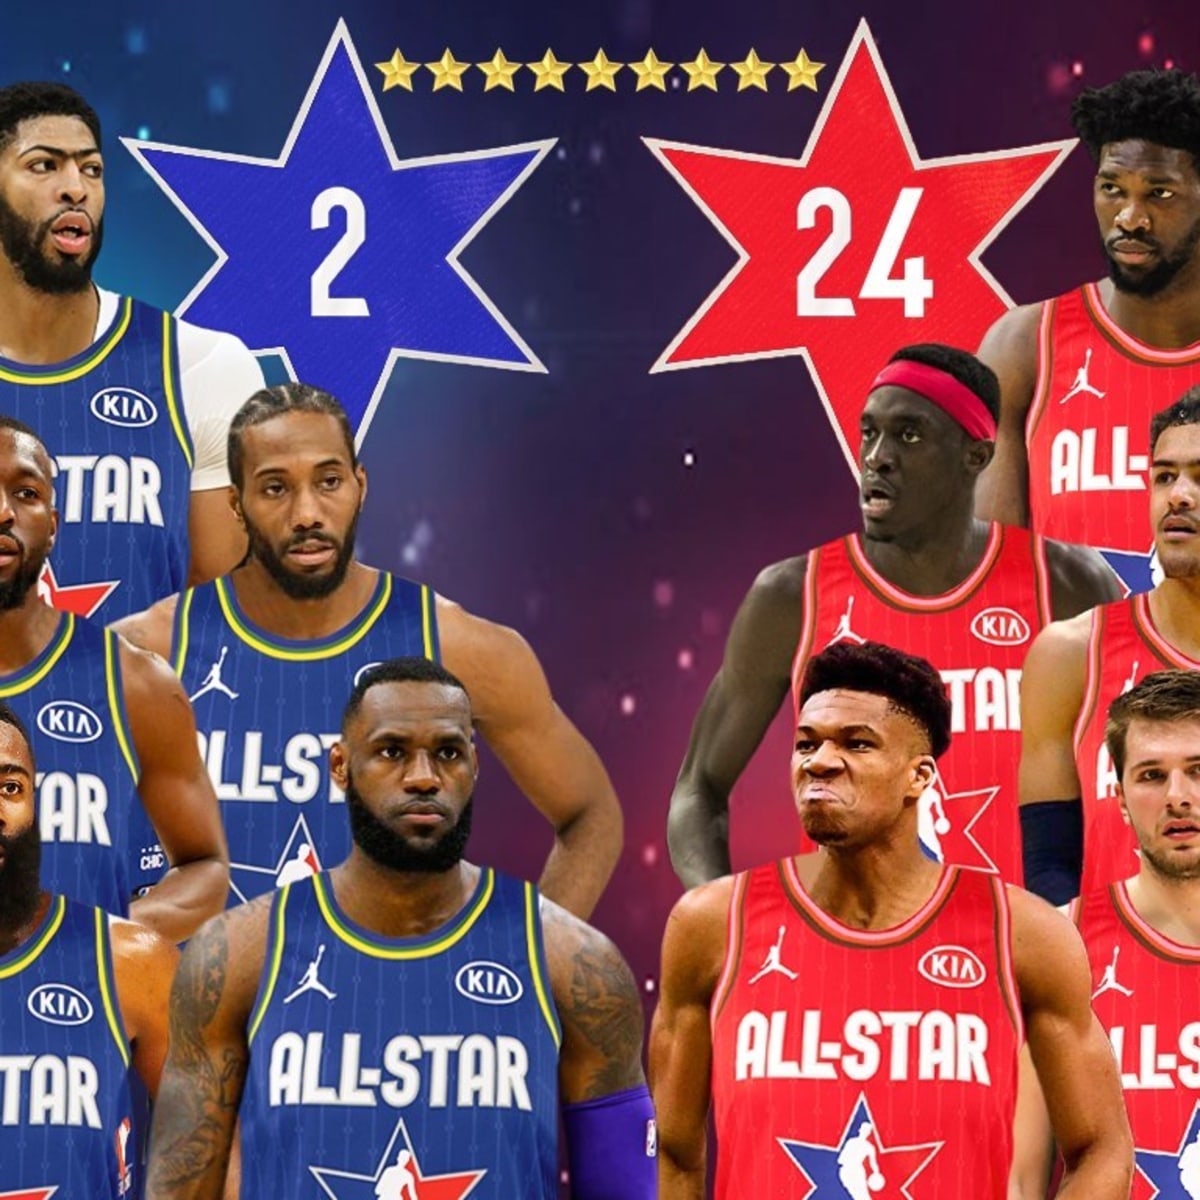 NBA All-Star Game 2019: LeBron vs. Giannis Jerseys and Top Player